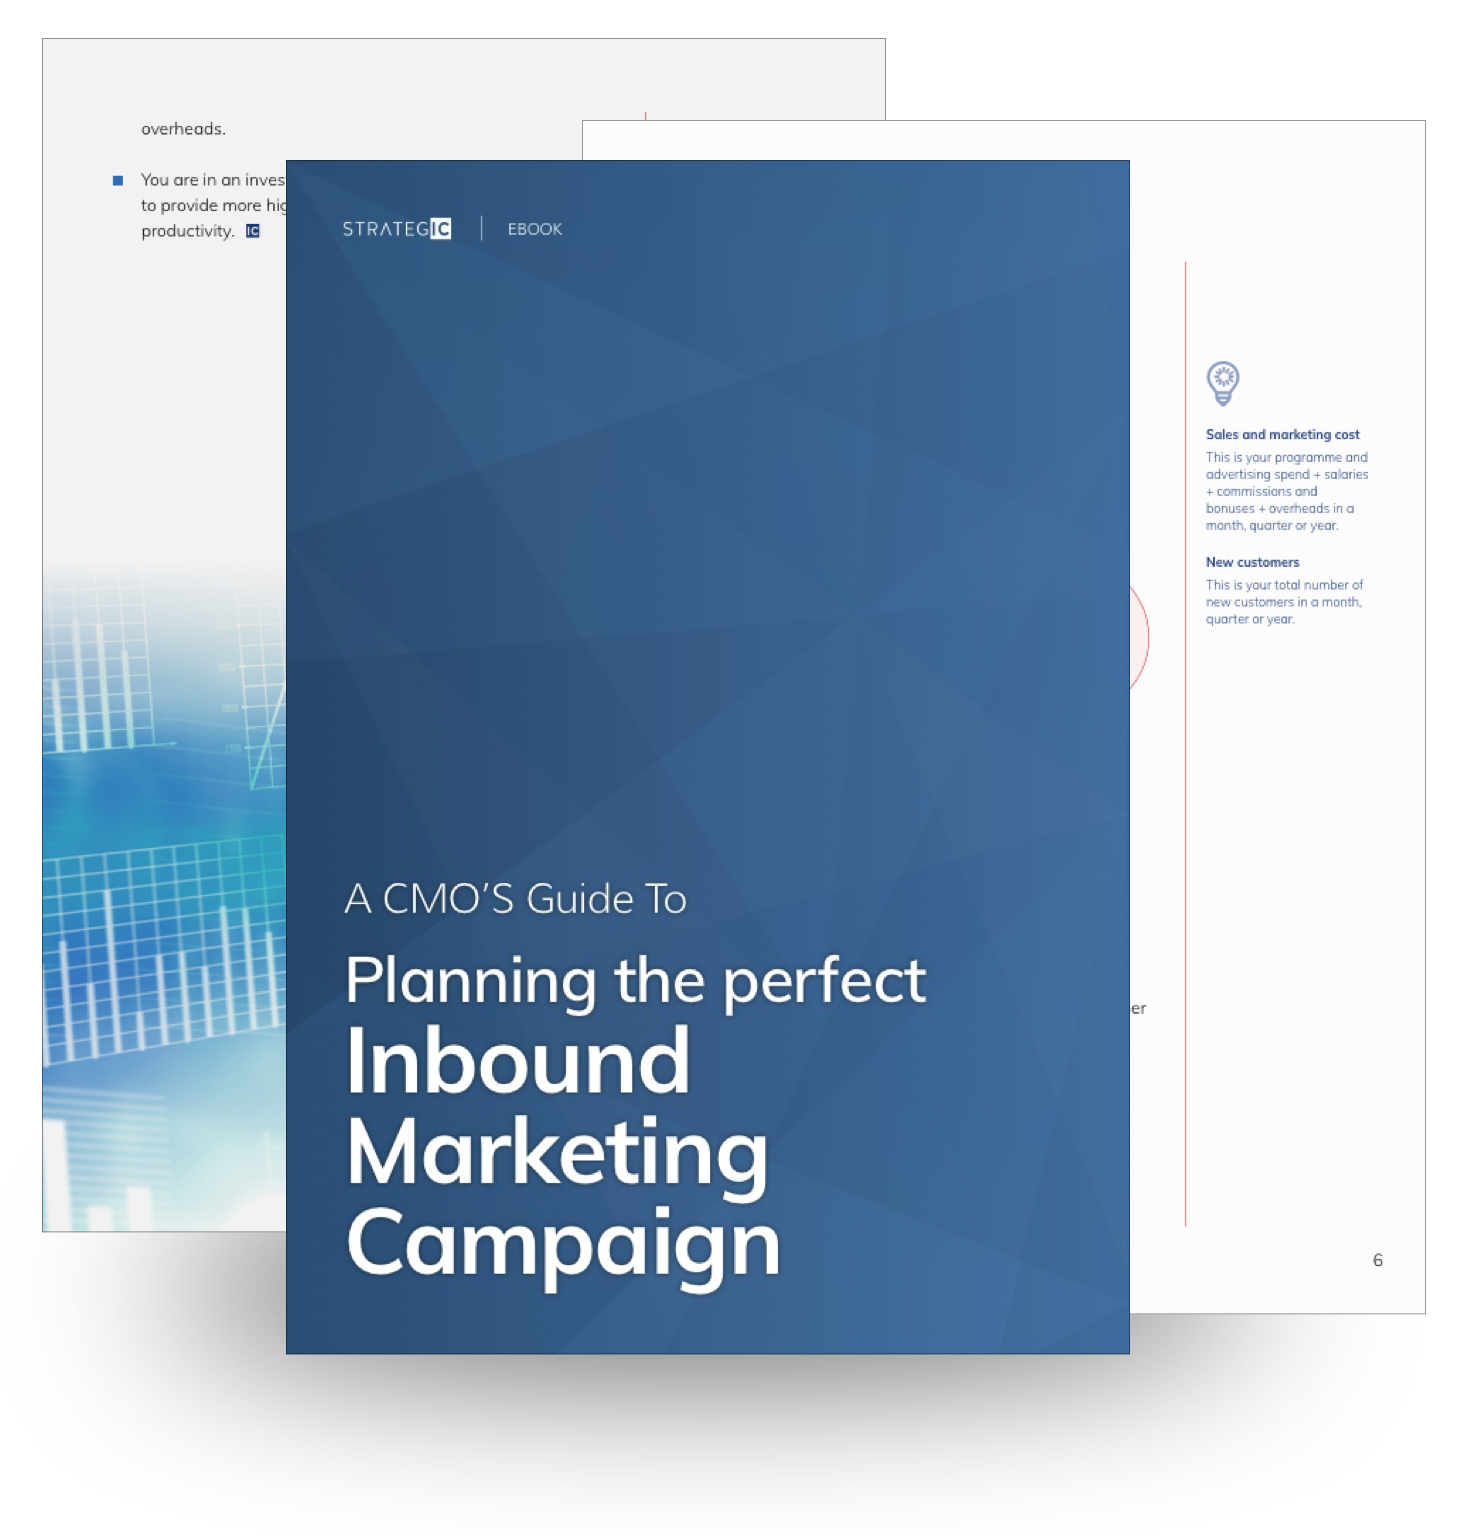 CMO's Guide to Planning the Perfect Inbound Marketing Campaign